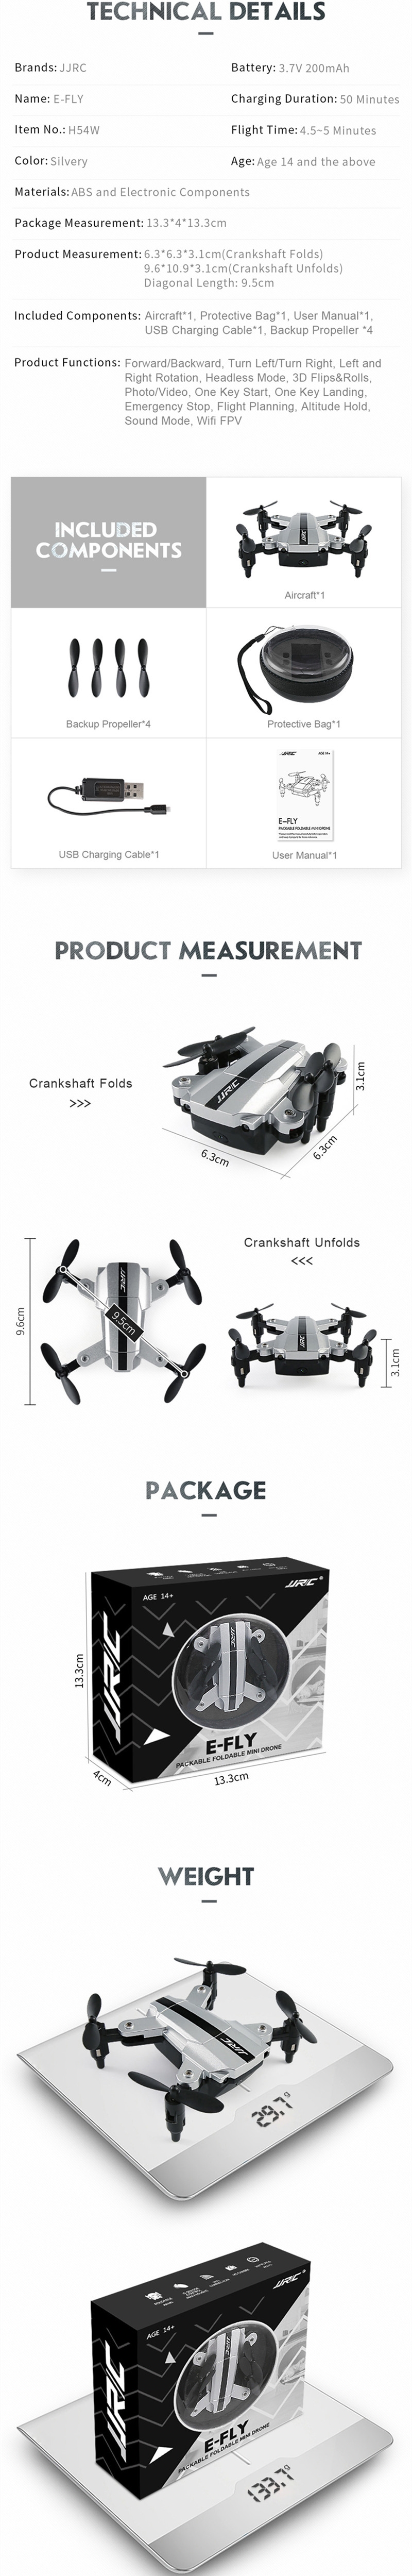 JJRC H54W E-Fly WiFi FPV Mini Foldable Drone With 480P Camera Altitude Hold Mode RC Quadcopter BNF